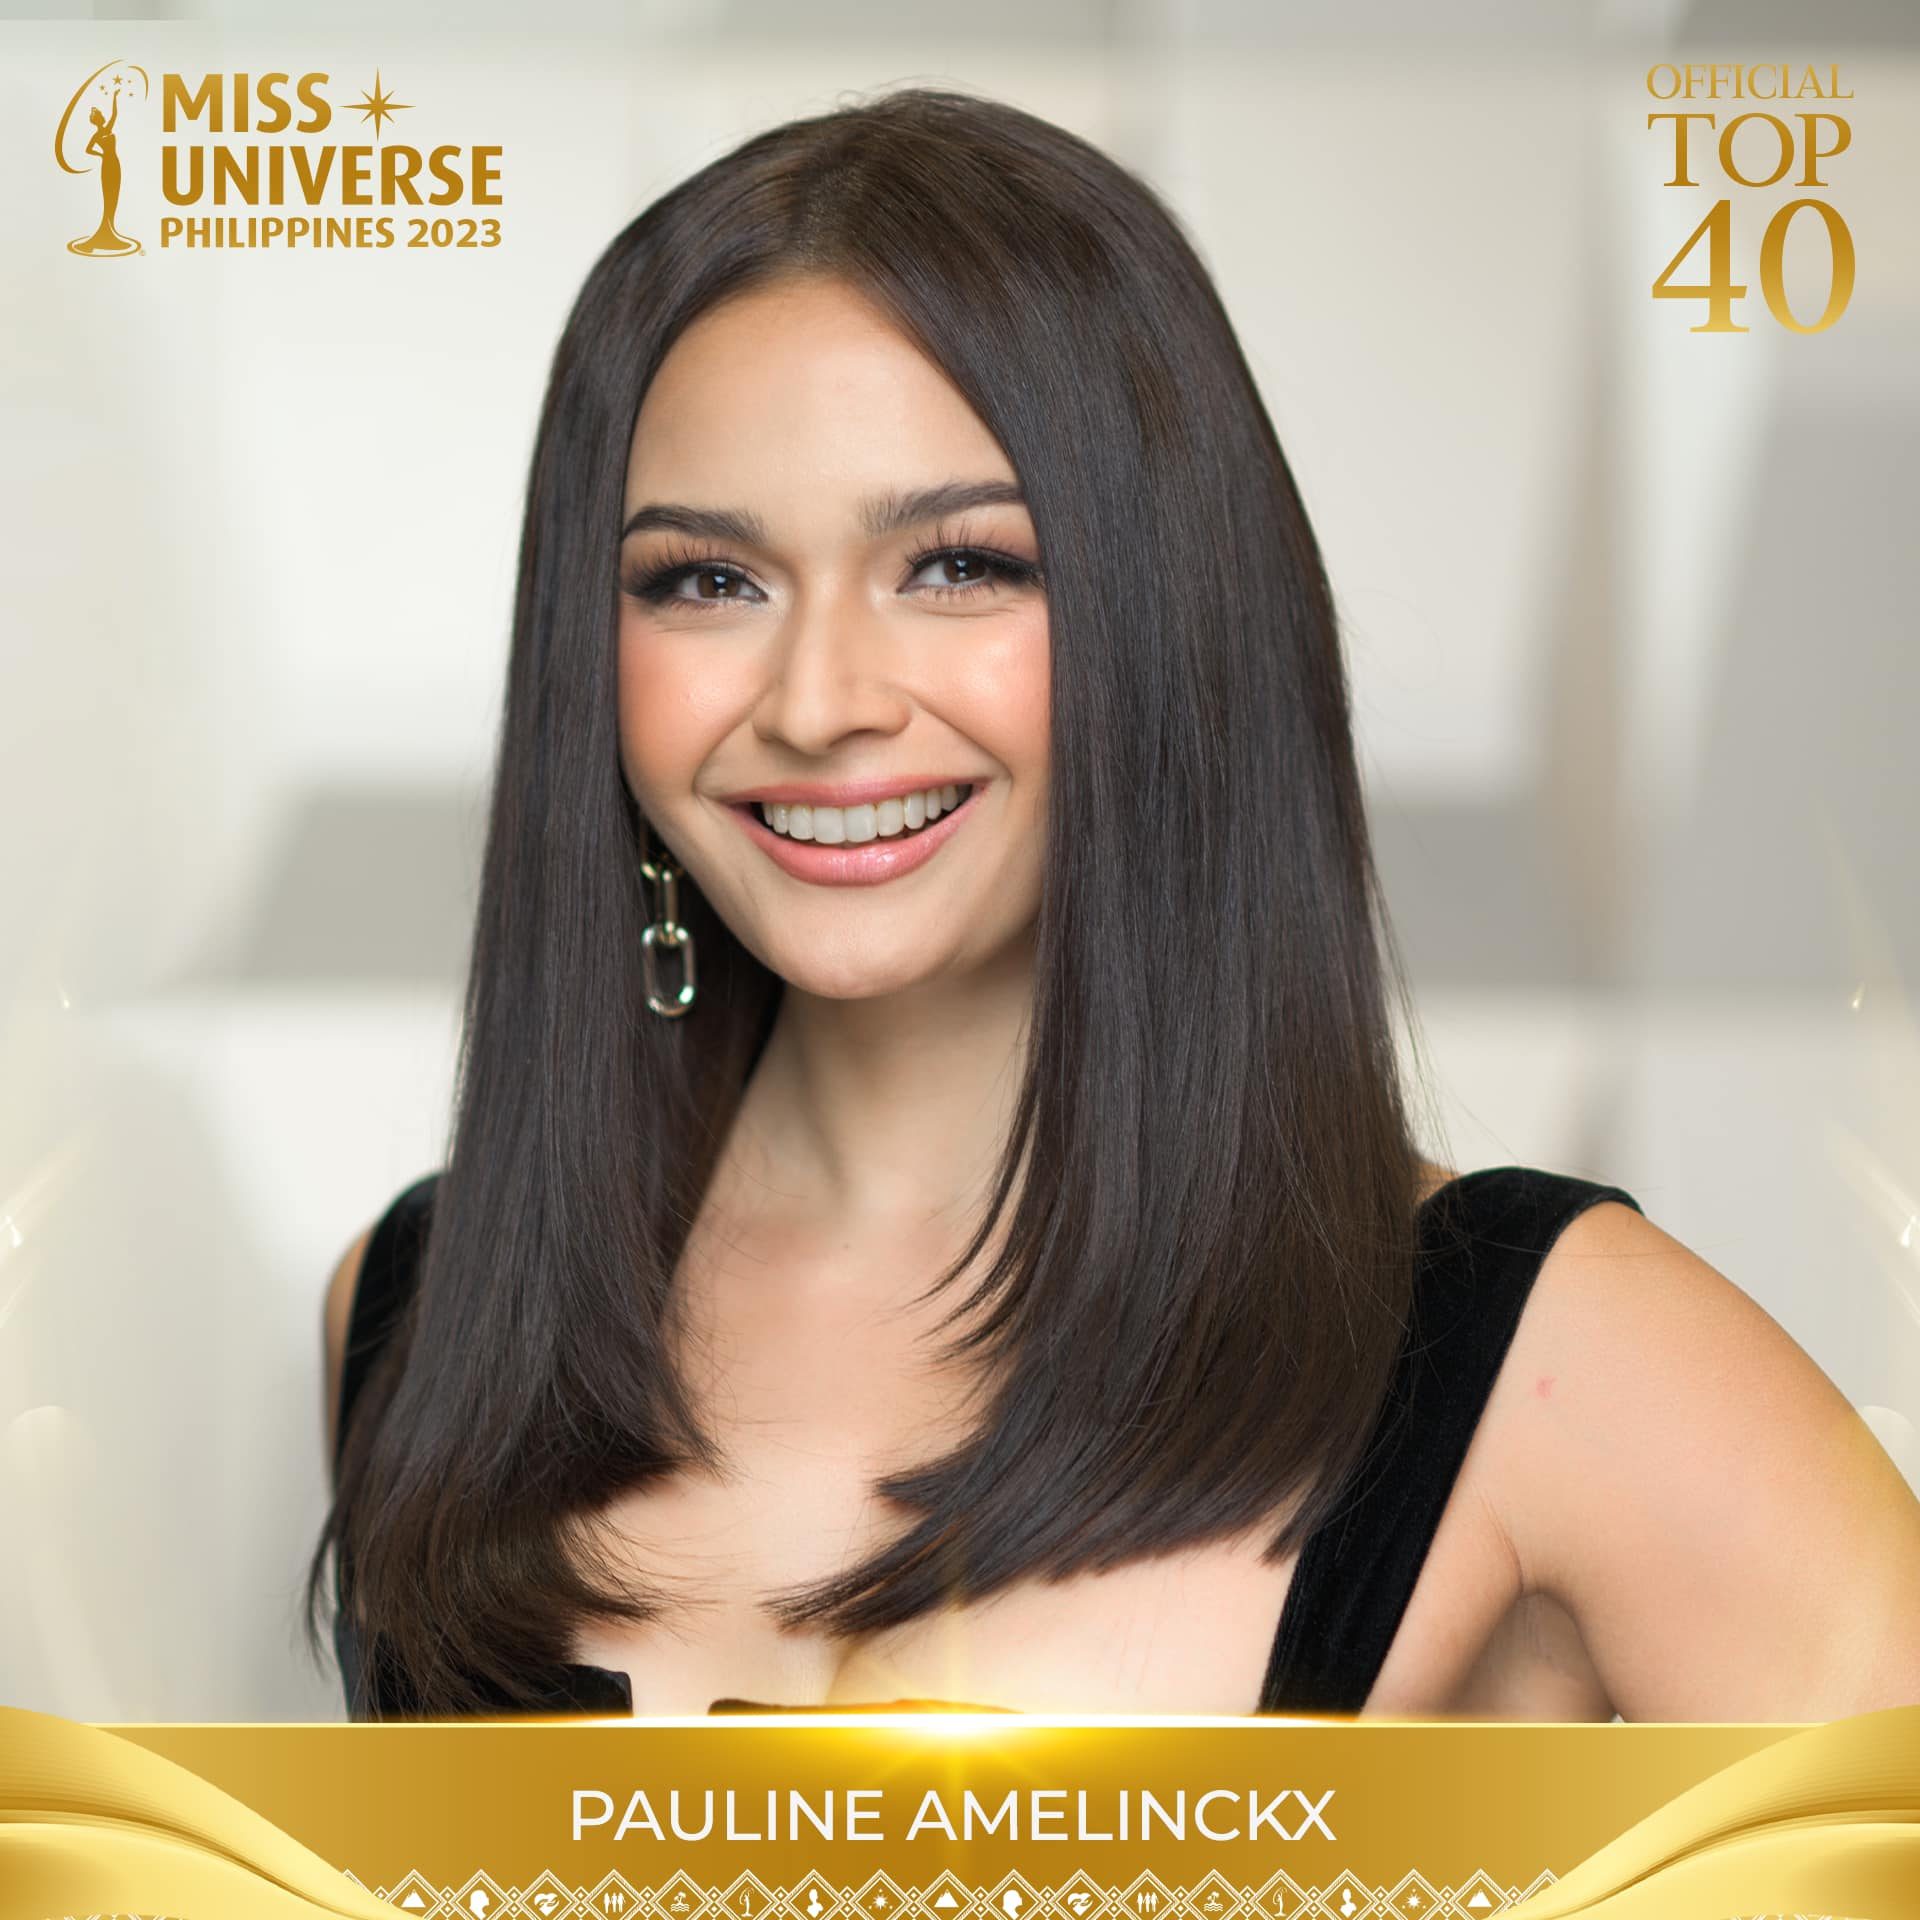 Miss Universe Philippines 2023's Top 40 Candidates